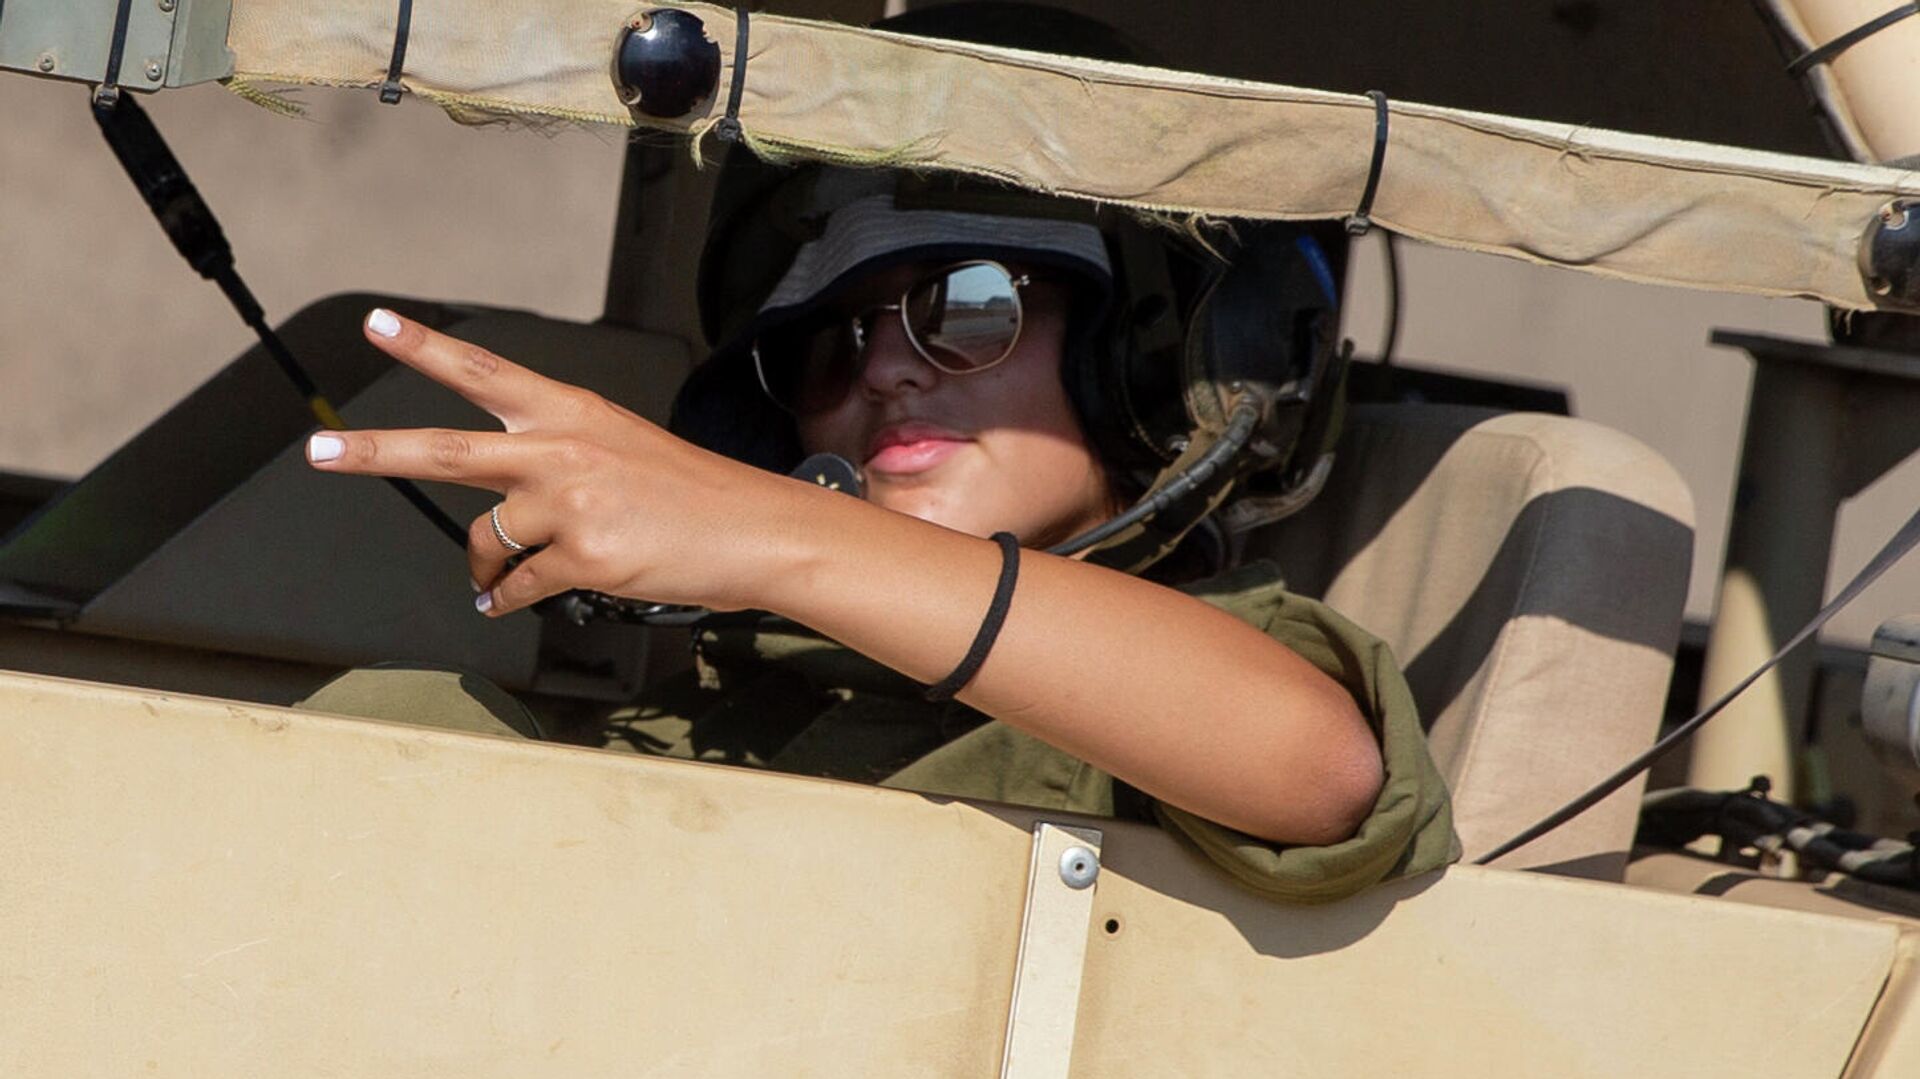 An Israeli female soldier flashes a victory sign while siting in a military vehicle during an exercise in the Israeli controlled Golan Heights near the border with Syria, Tuesday, Aug. 4, 2020.  - Sputnik International, 1920, 27.05.2022